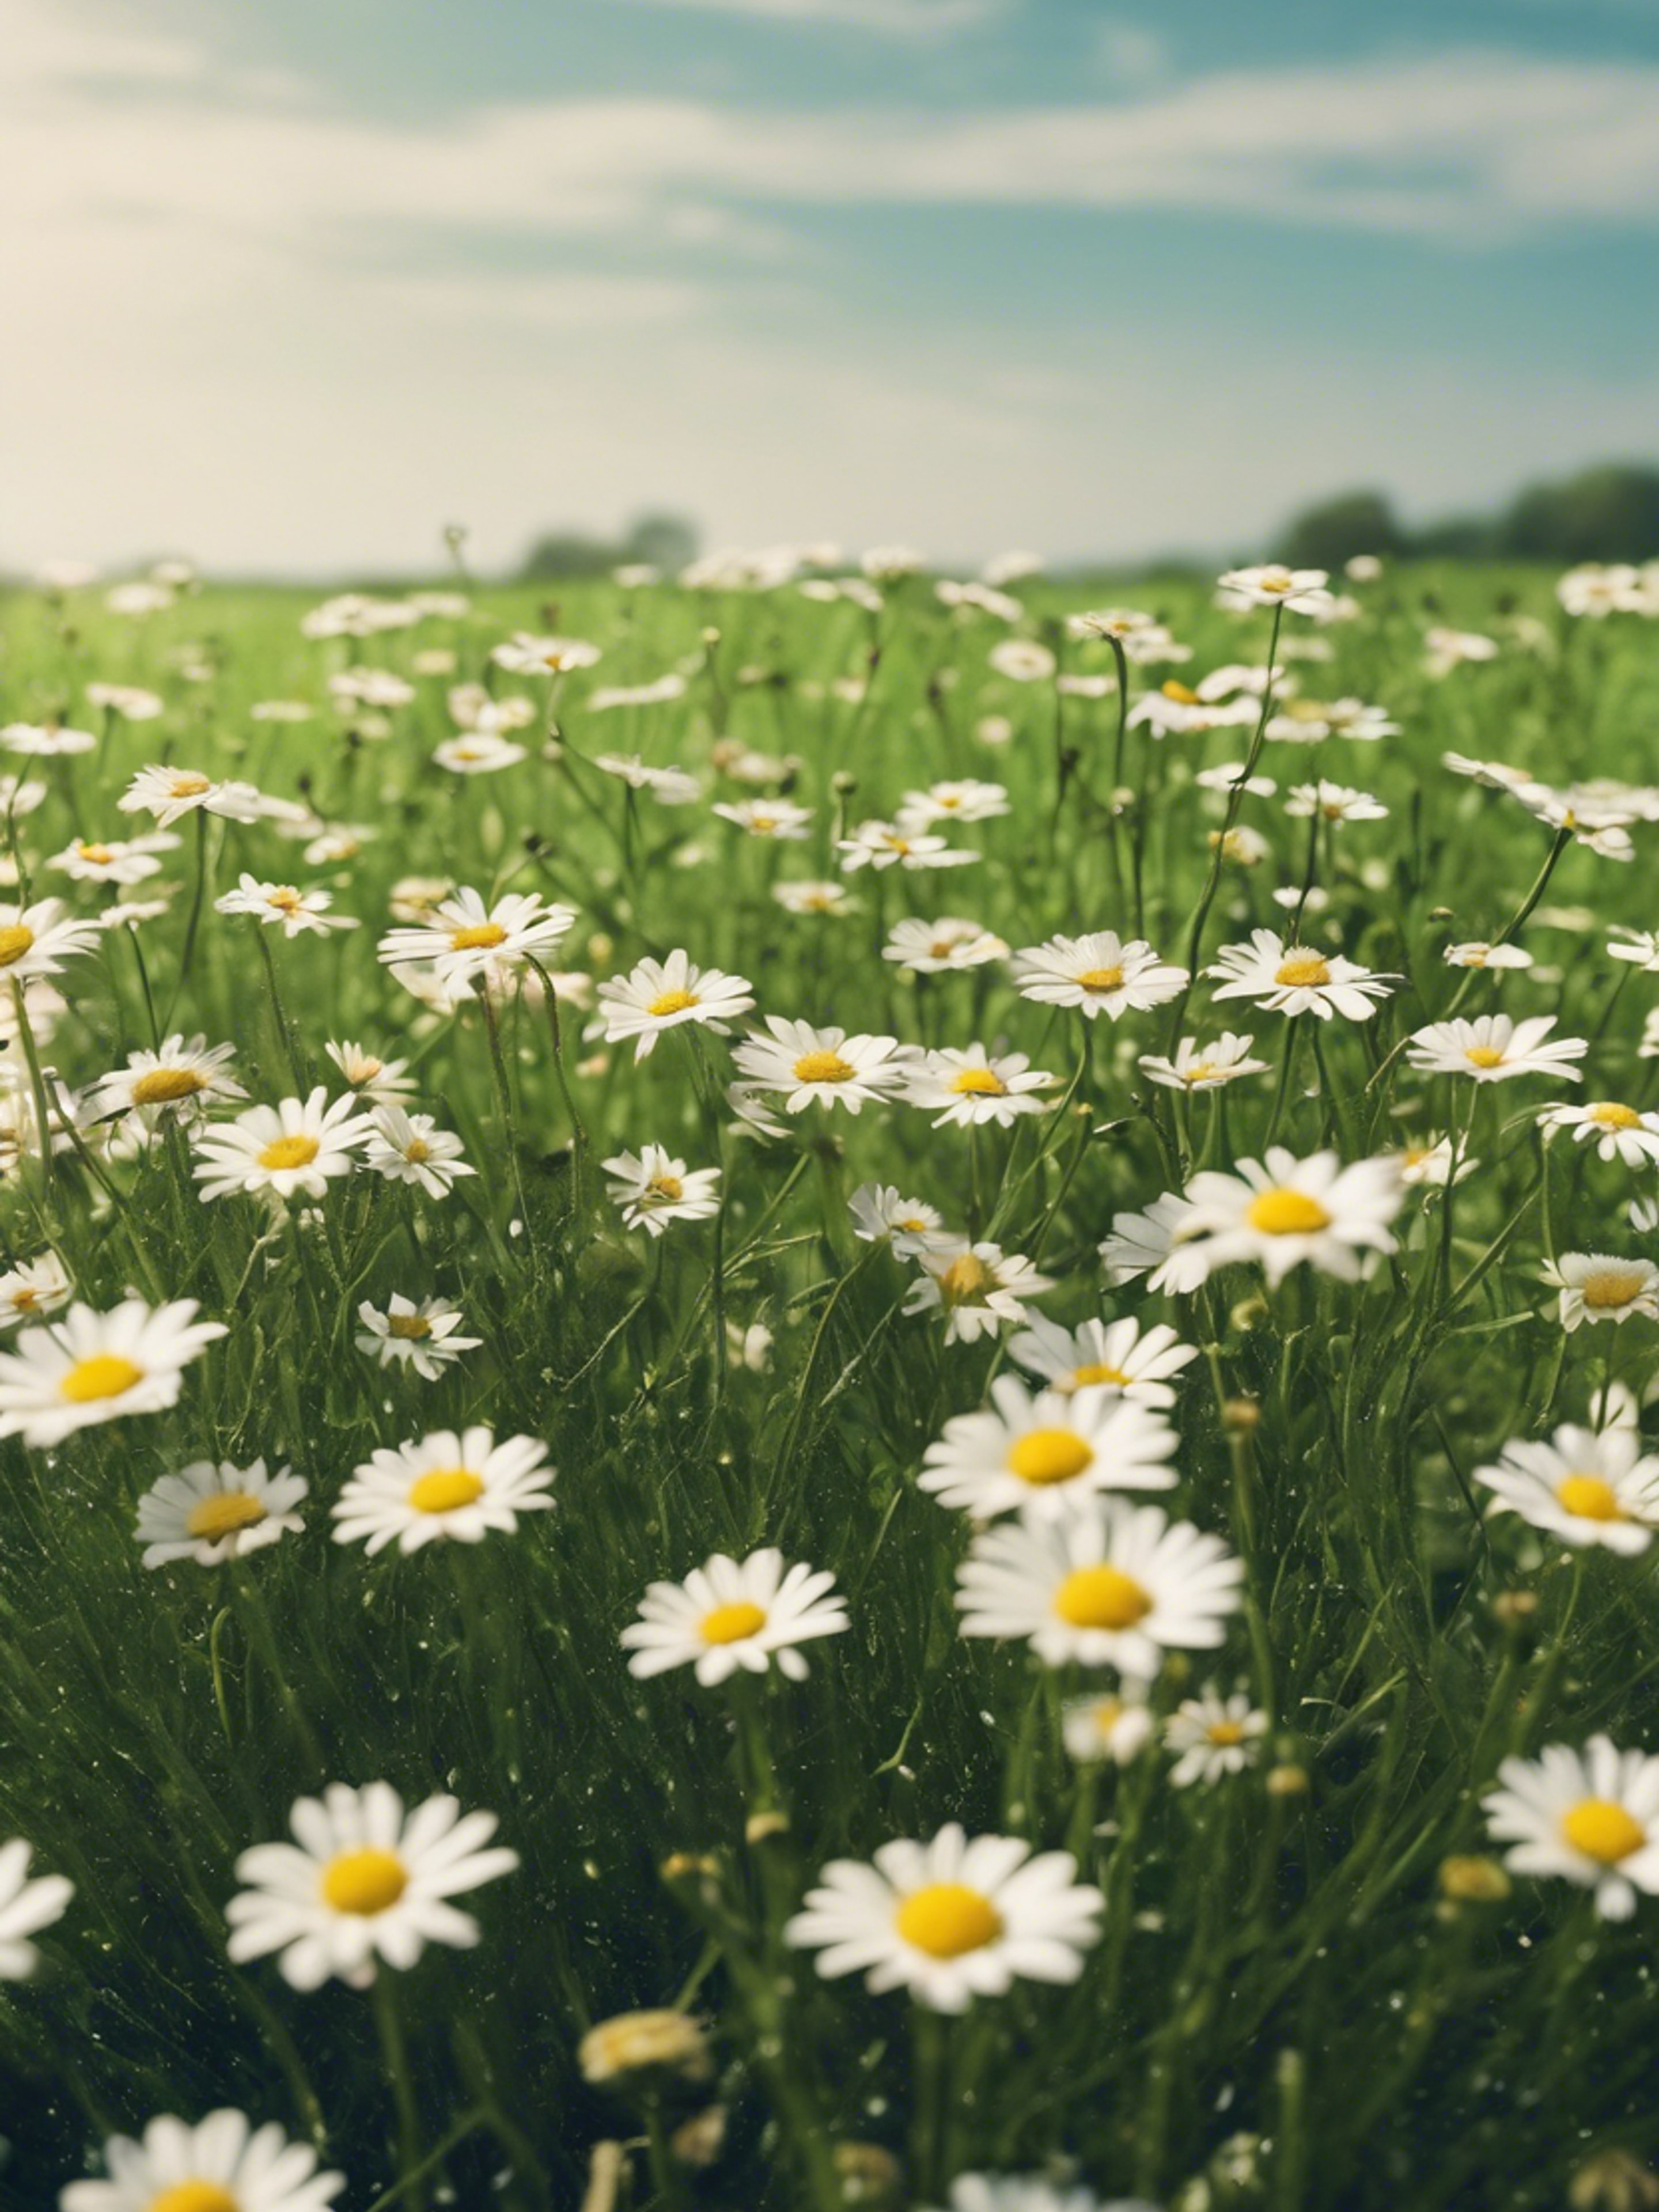 A cool green field sprinkled with daisies under a morning sky. Шпалери[e270184600e04e908453]